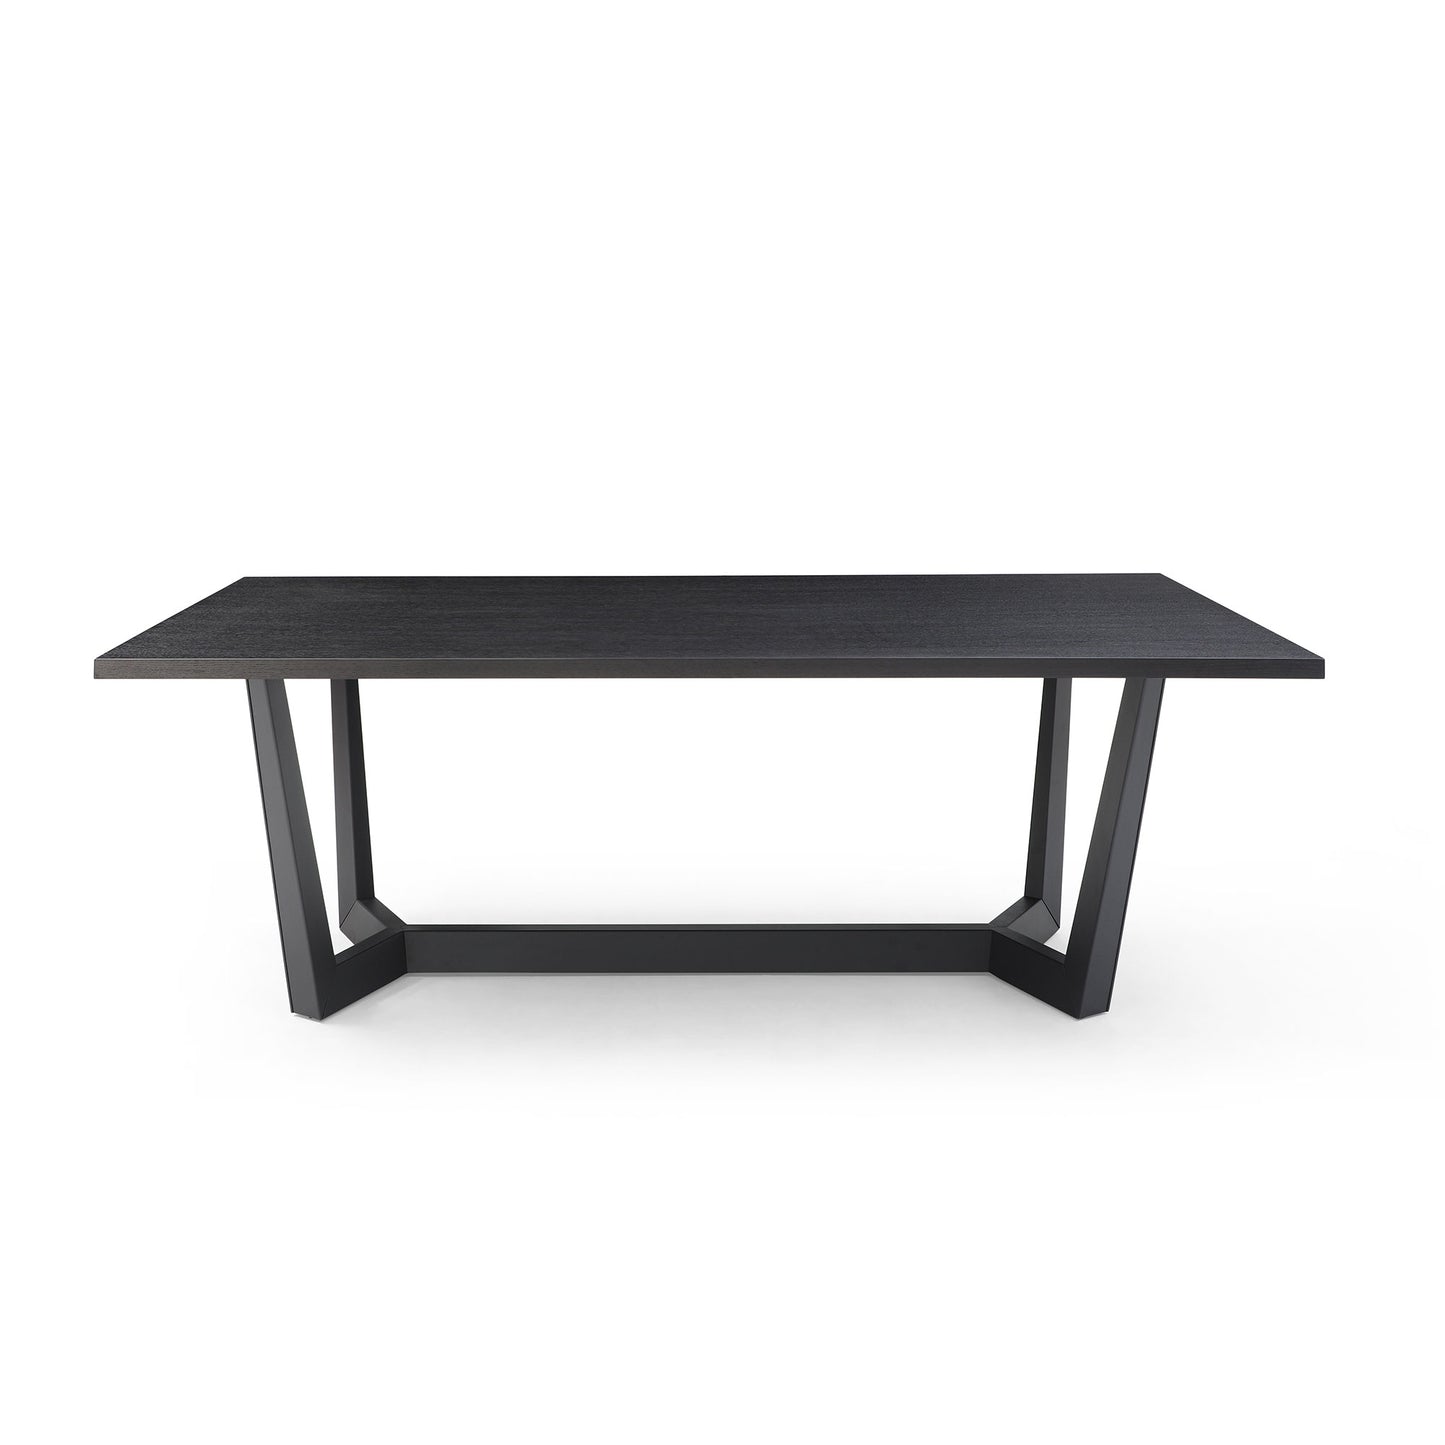 86.86&quot; Dining Table  Mid-Century Modern Rectangle MDF Kitchen Table for Dining Room Balcony Cafe Bar Conference Matt black